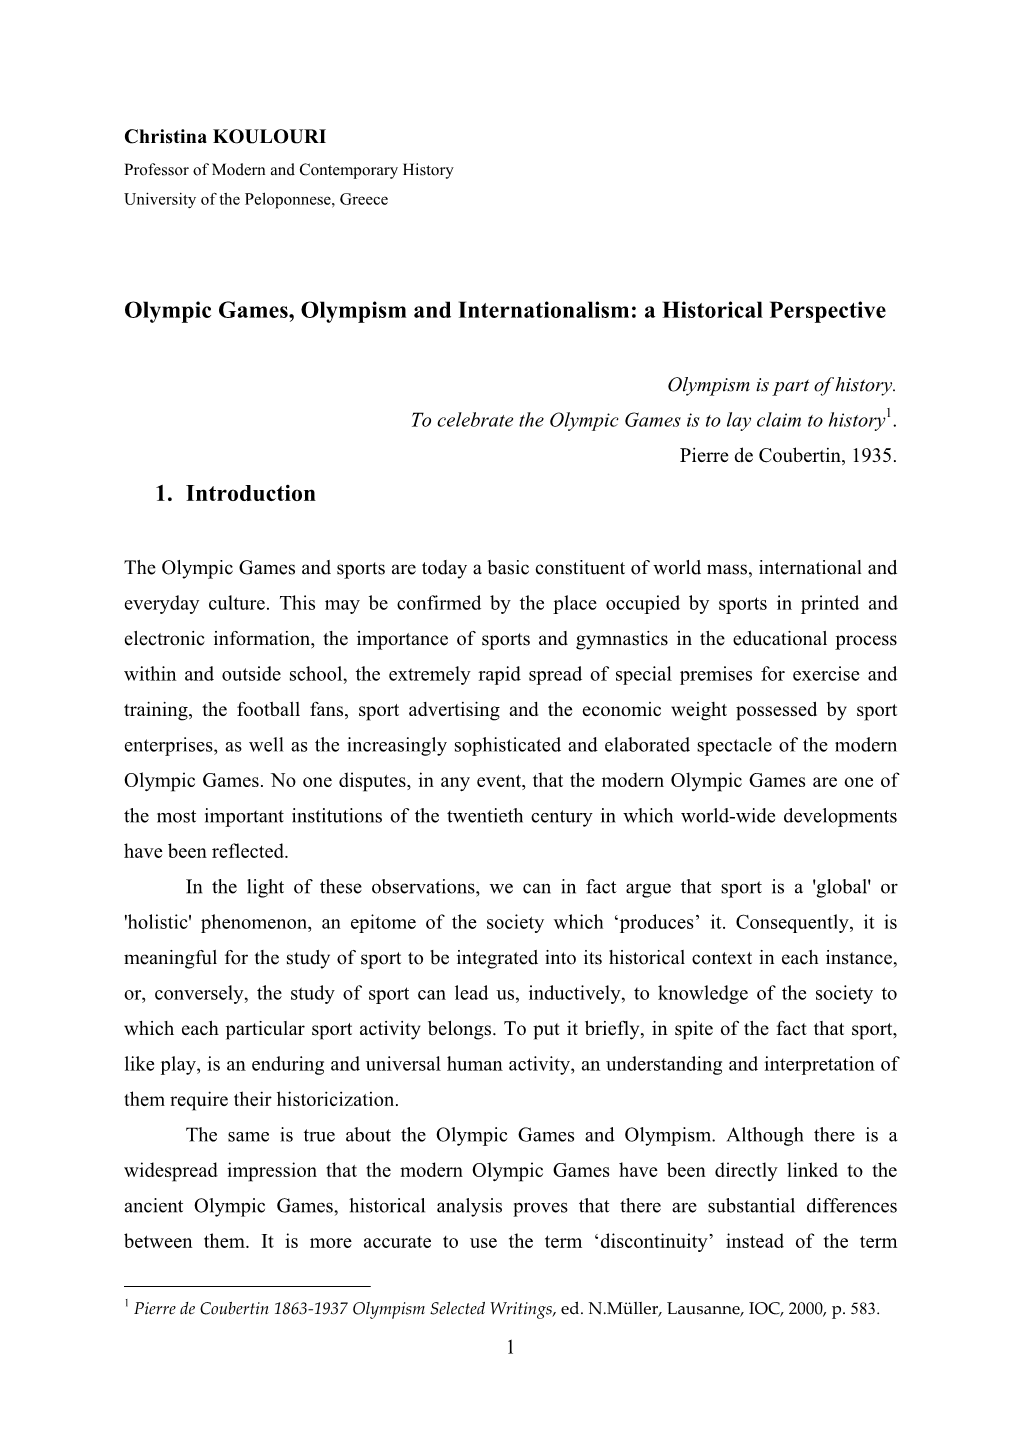 Olympic Games, Olympism and Internationalism: a Historical Perspective